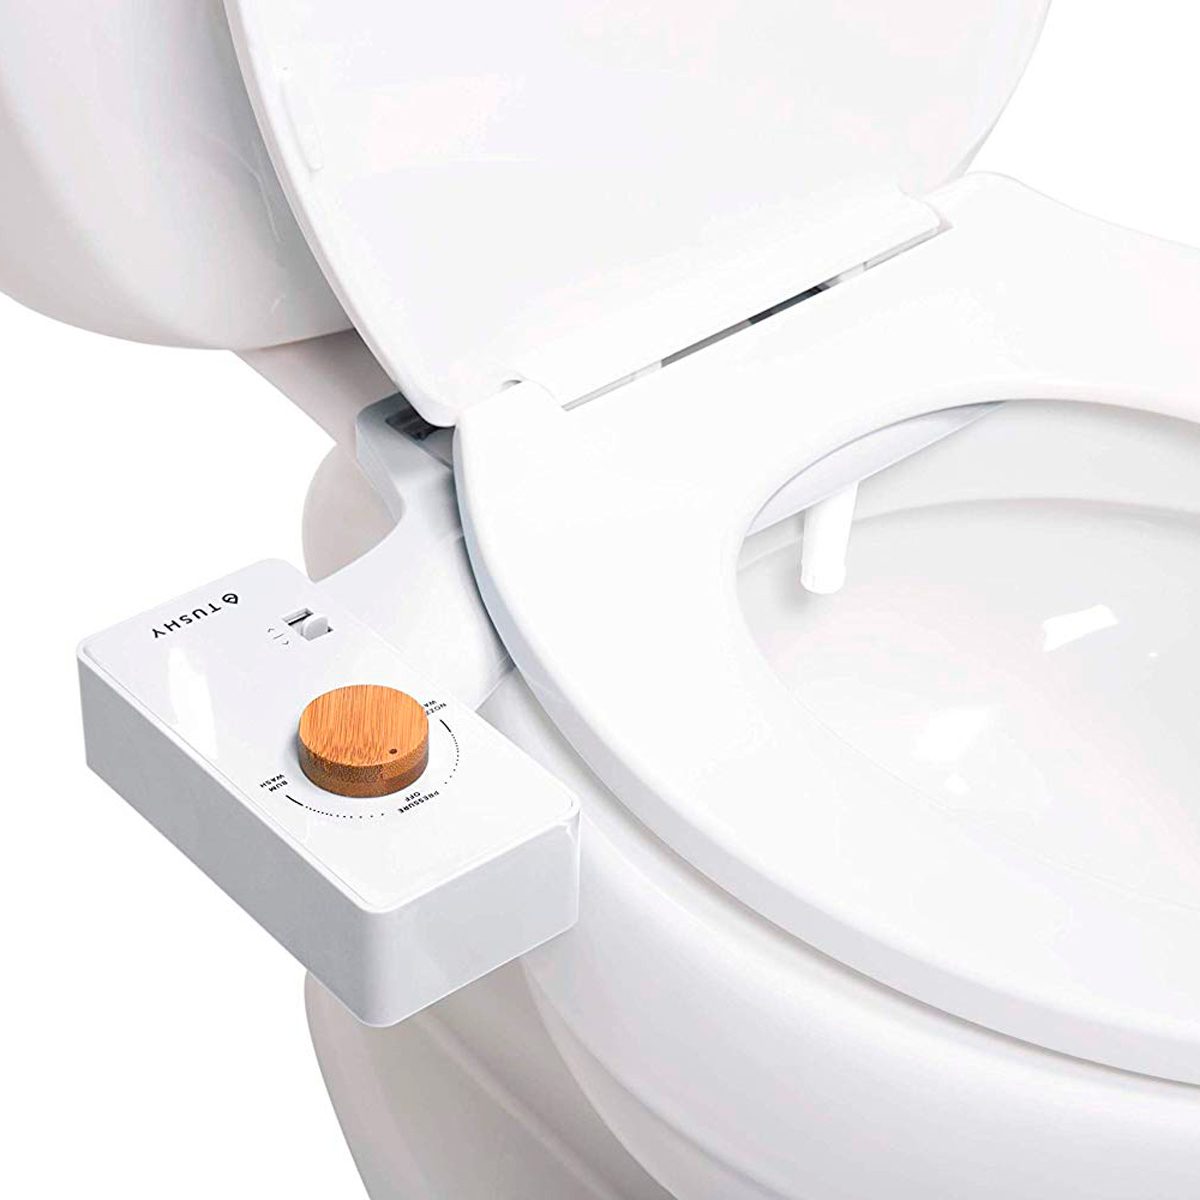 10 Bidet Attachments for Your Toilet (Plus 1 You Can Take Wherever You Go!)